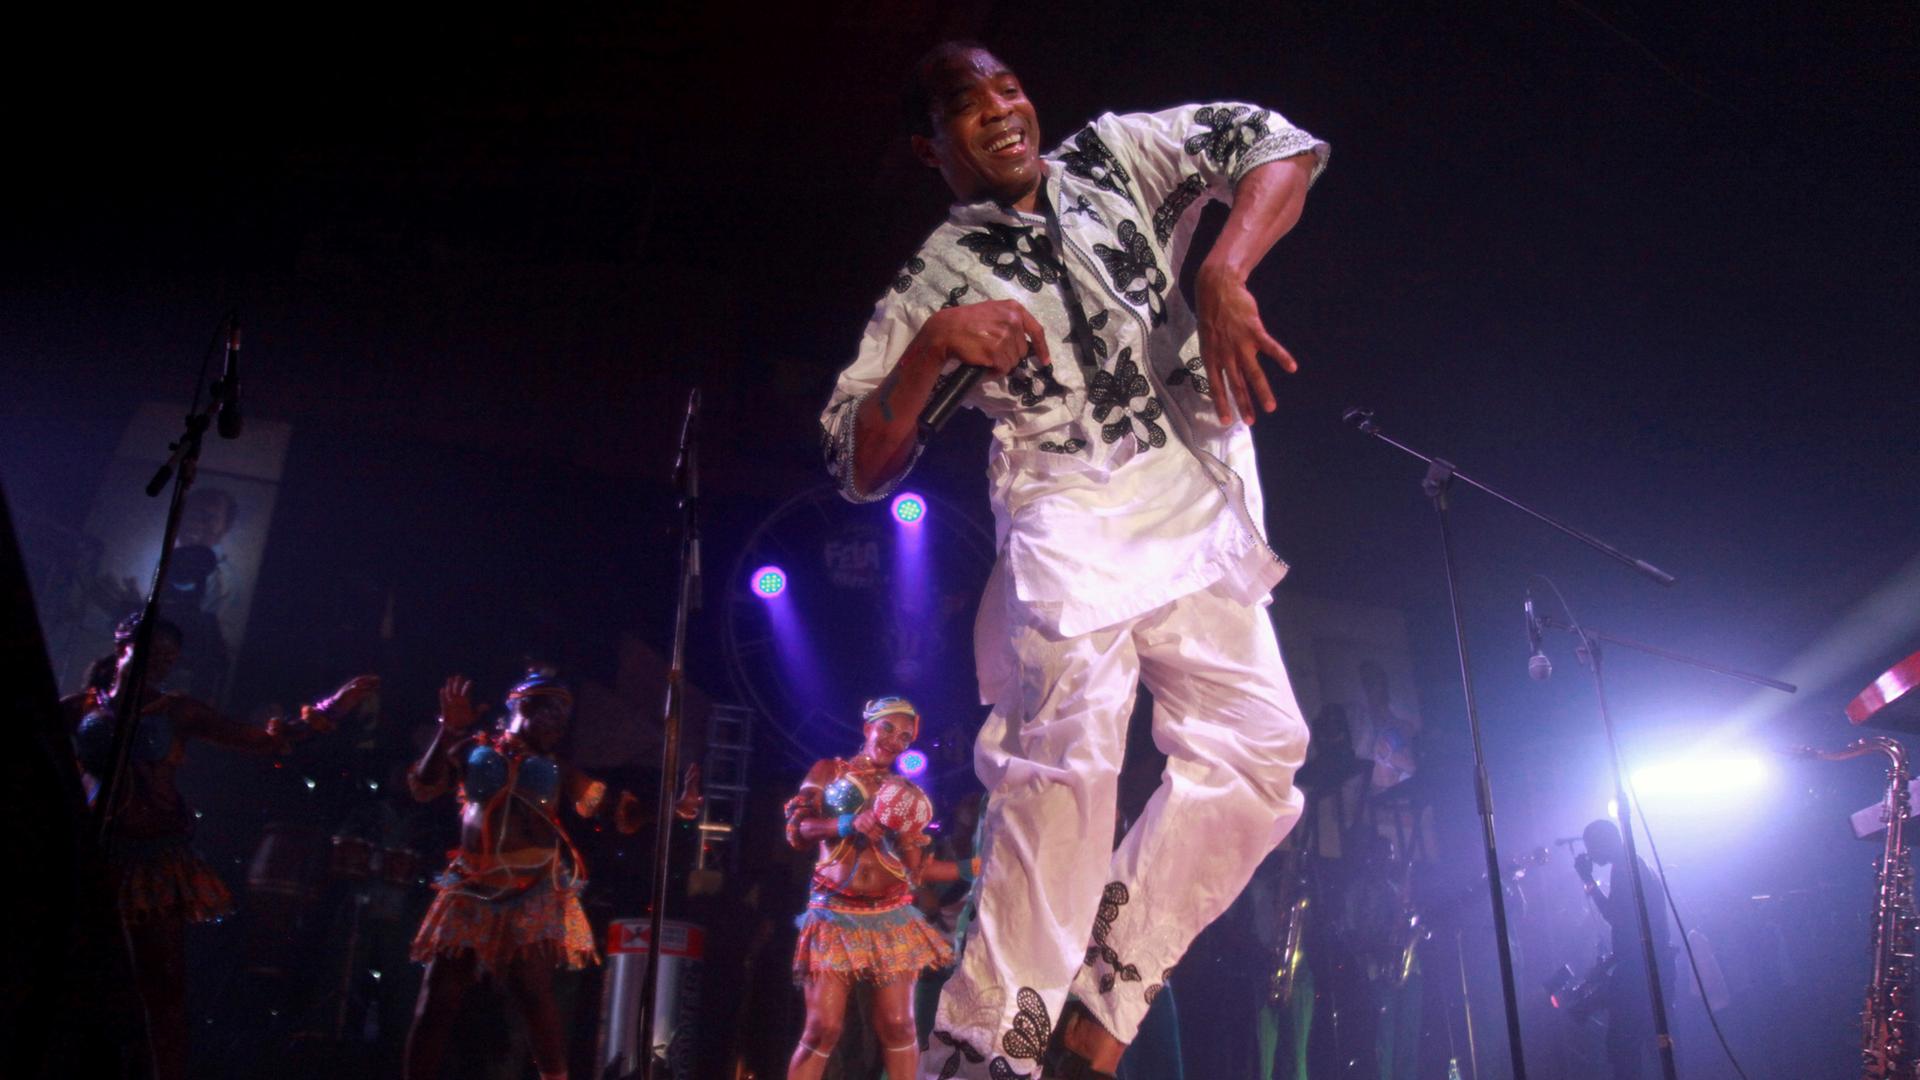 Musician Femi Kuti, son of Nigeria's music legend Fela Kuti, performs with his band at a night show marking the end of a week-long celebration honouring Fela, in Lagos October 22, 2012. 